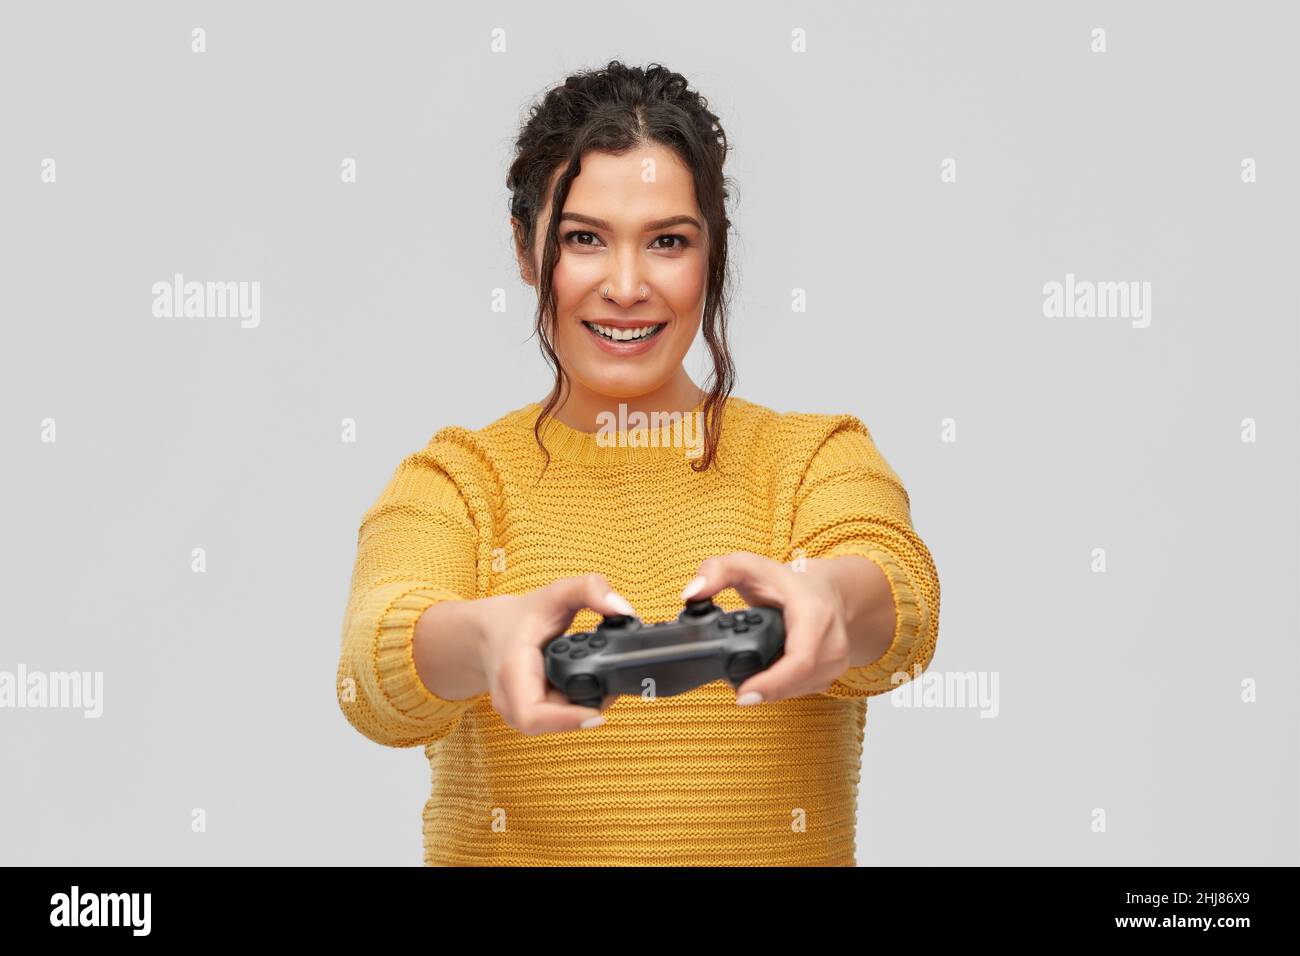 happy young woman with gamepad playing video game Stock Photo